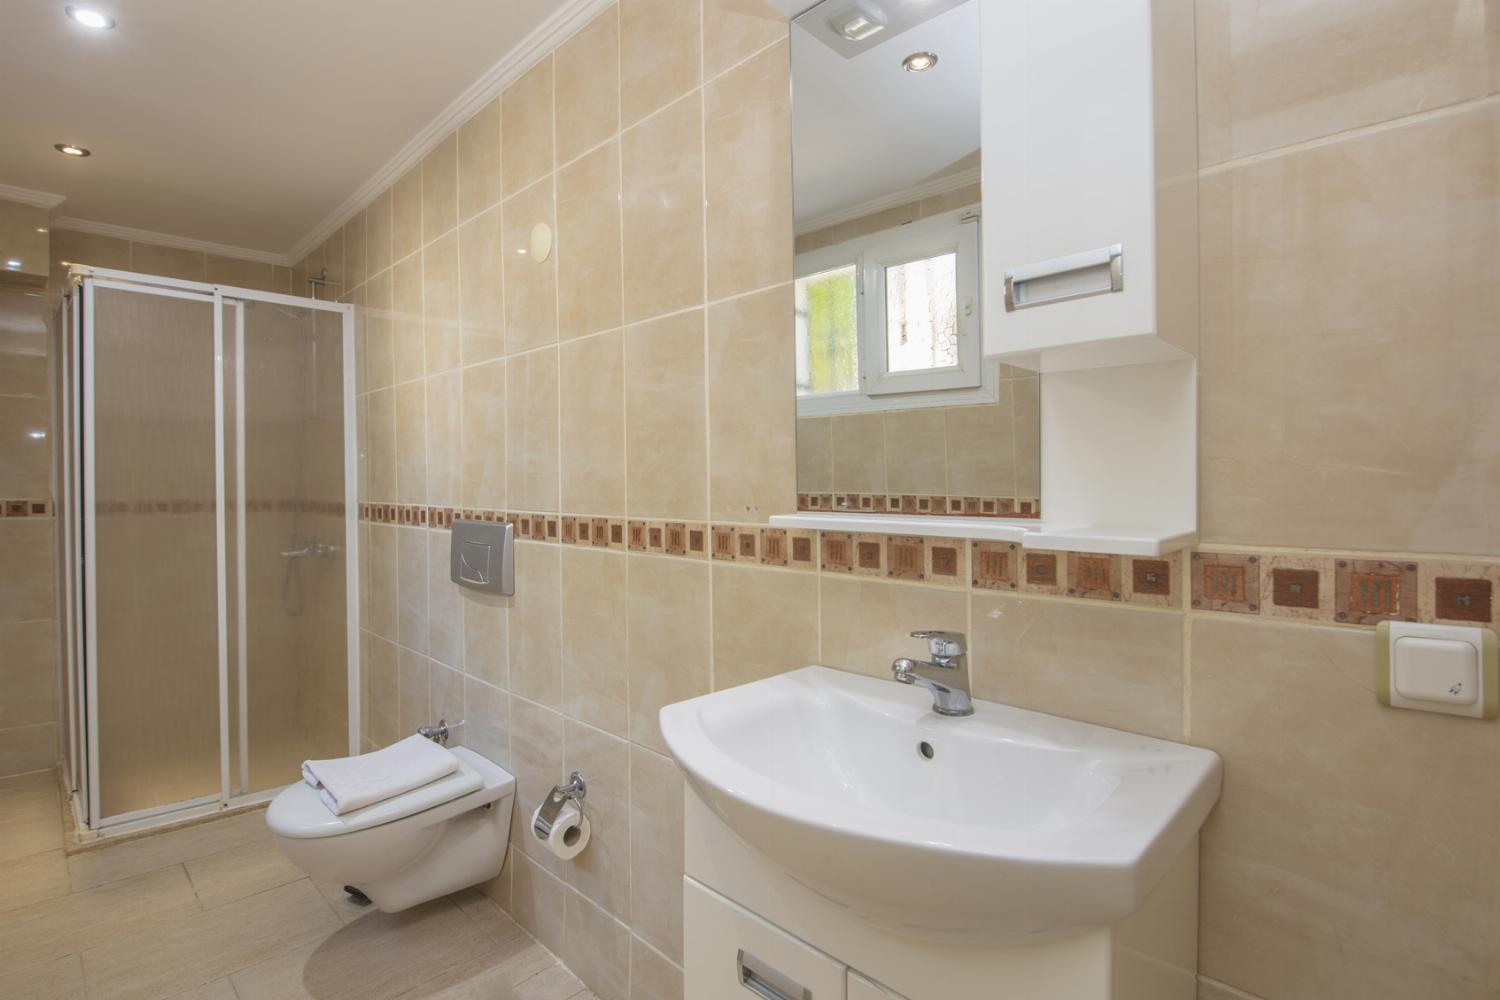 En suite bathroom with WC and shower